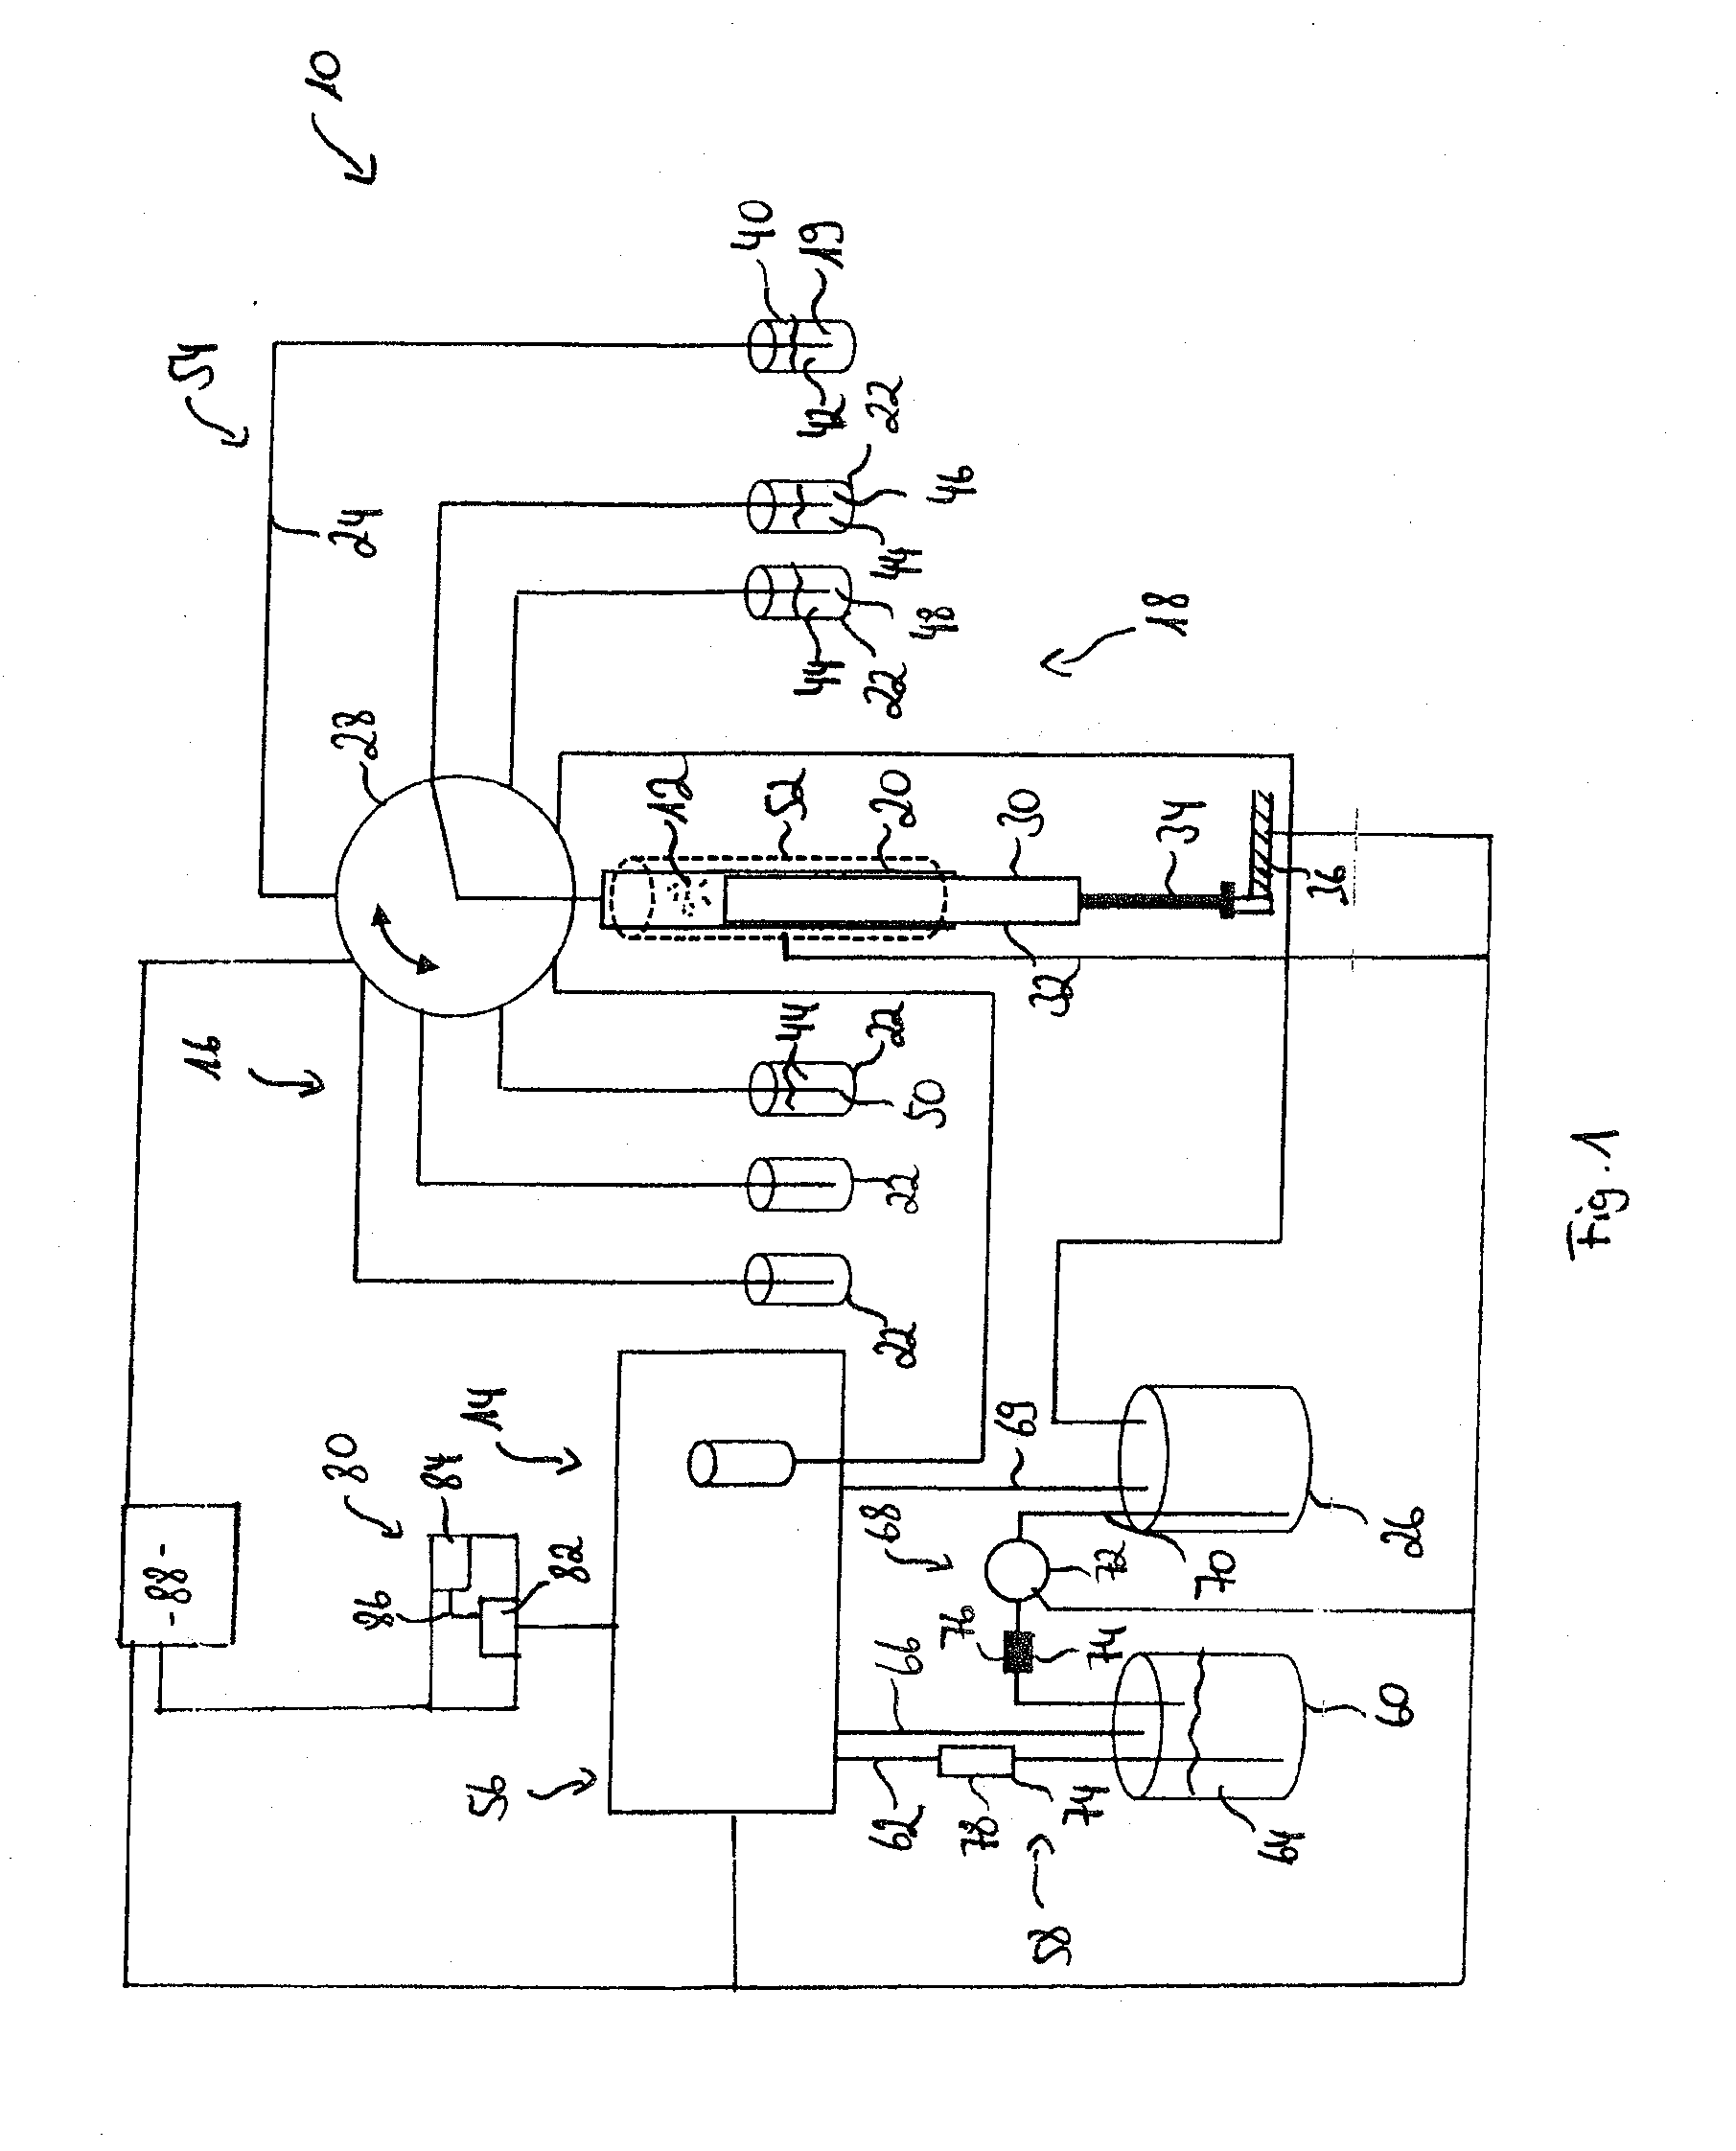 Detection apparatus and method for the automatic detection of particles